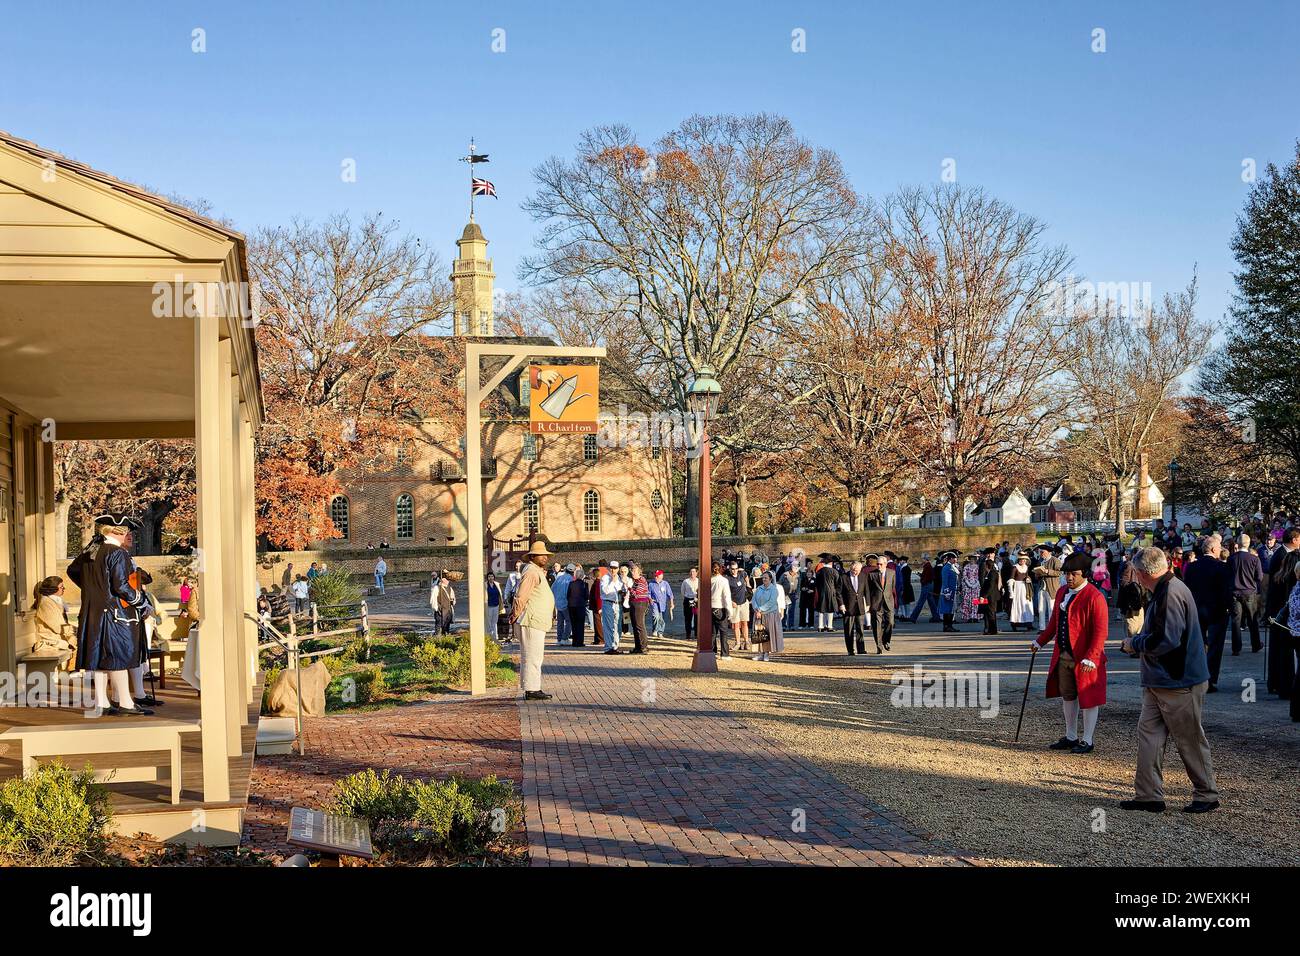 street scene, R. Charlton coffeehouse sign, lamppost, people, some in colonial garb, Capitol, brick sidewalk, trees, golden light, autumn, Colonial Wi Stock Photo